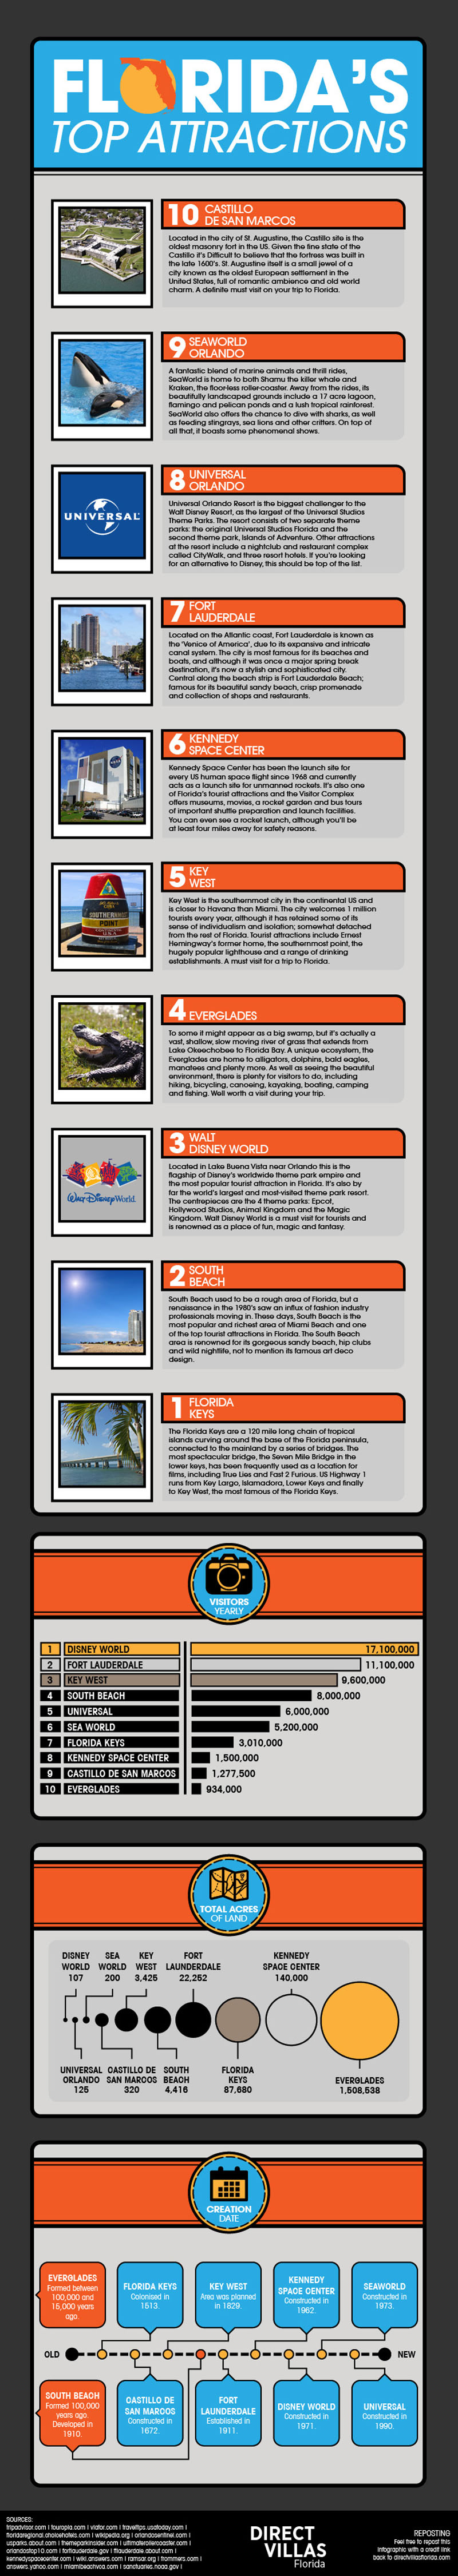 Florida's Top Attractions